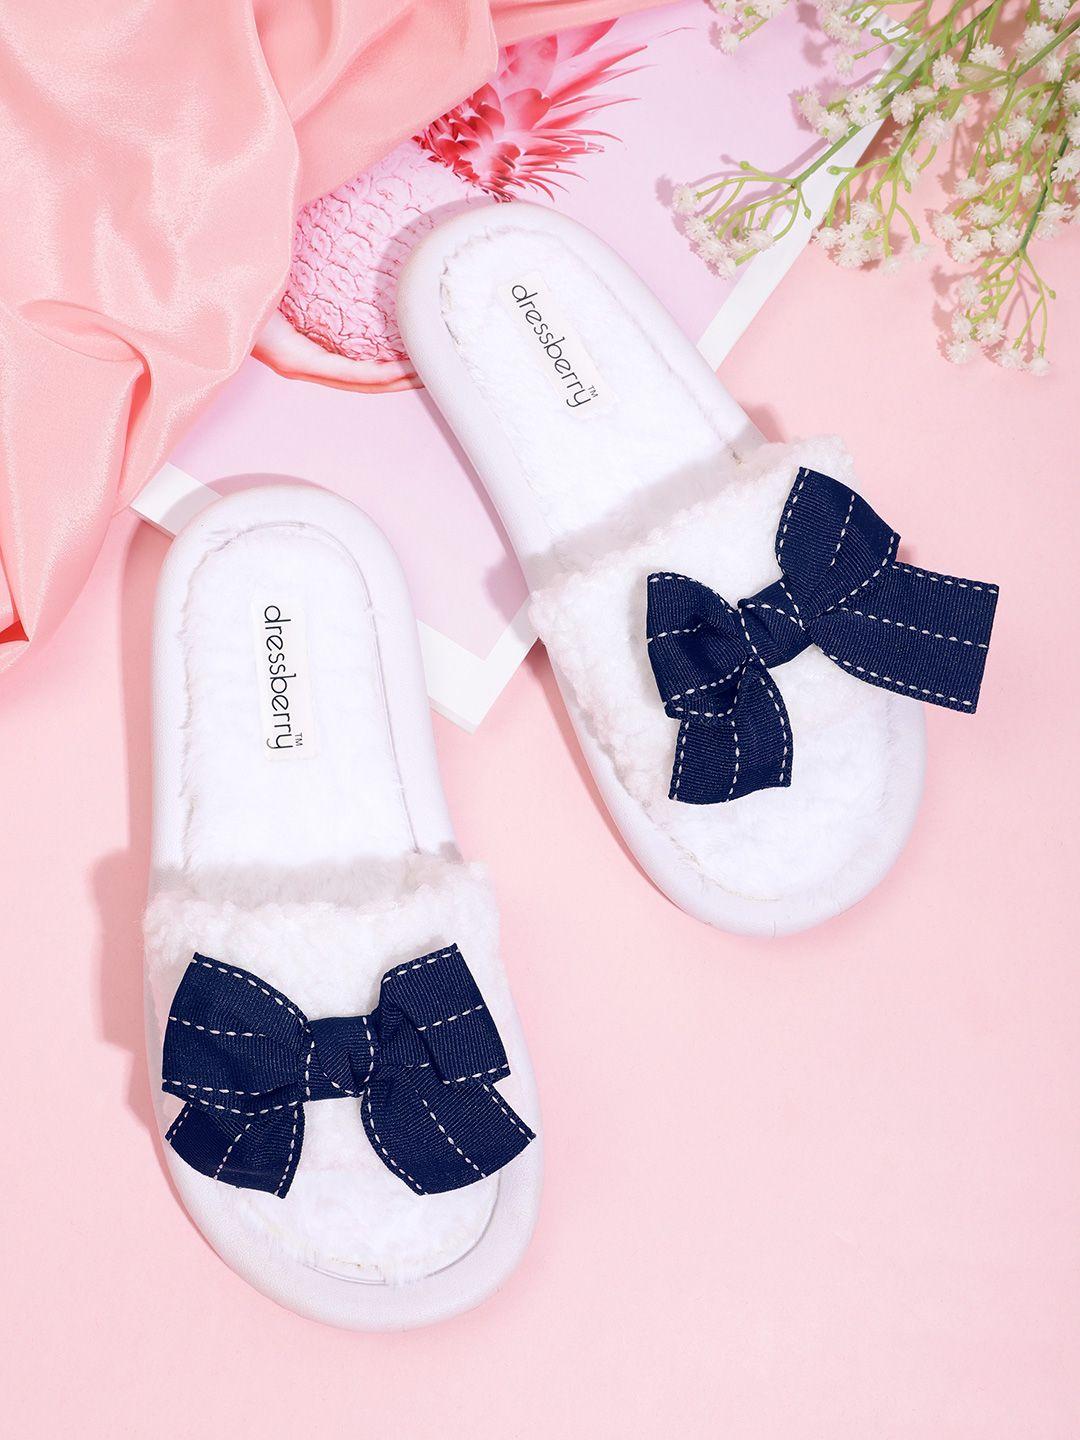 dressberry women self design room slippers with bow detail